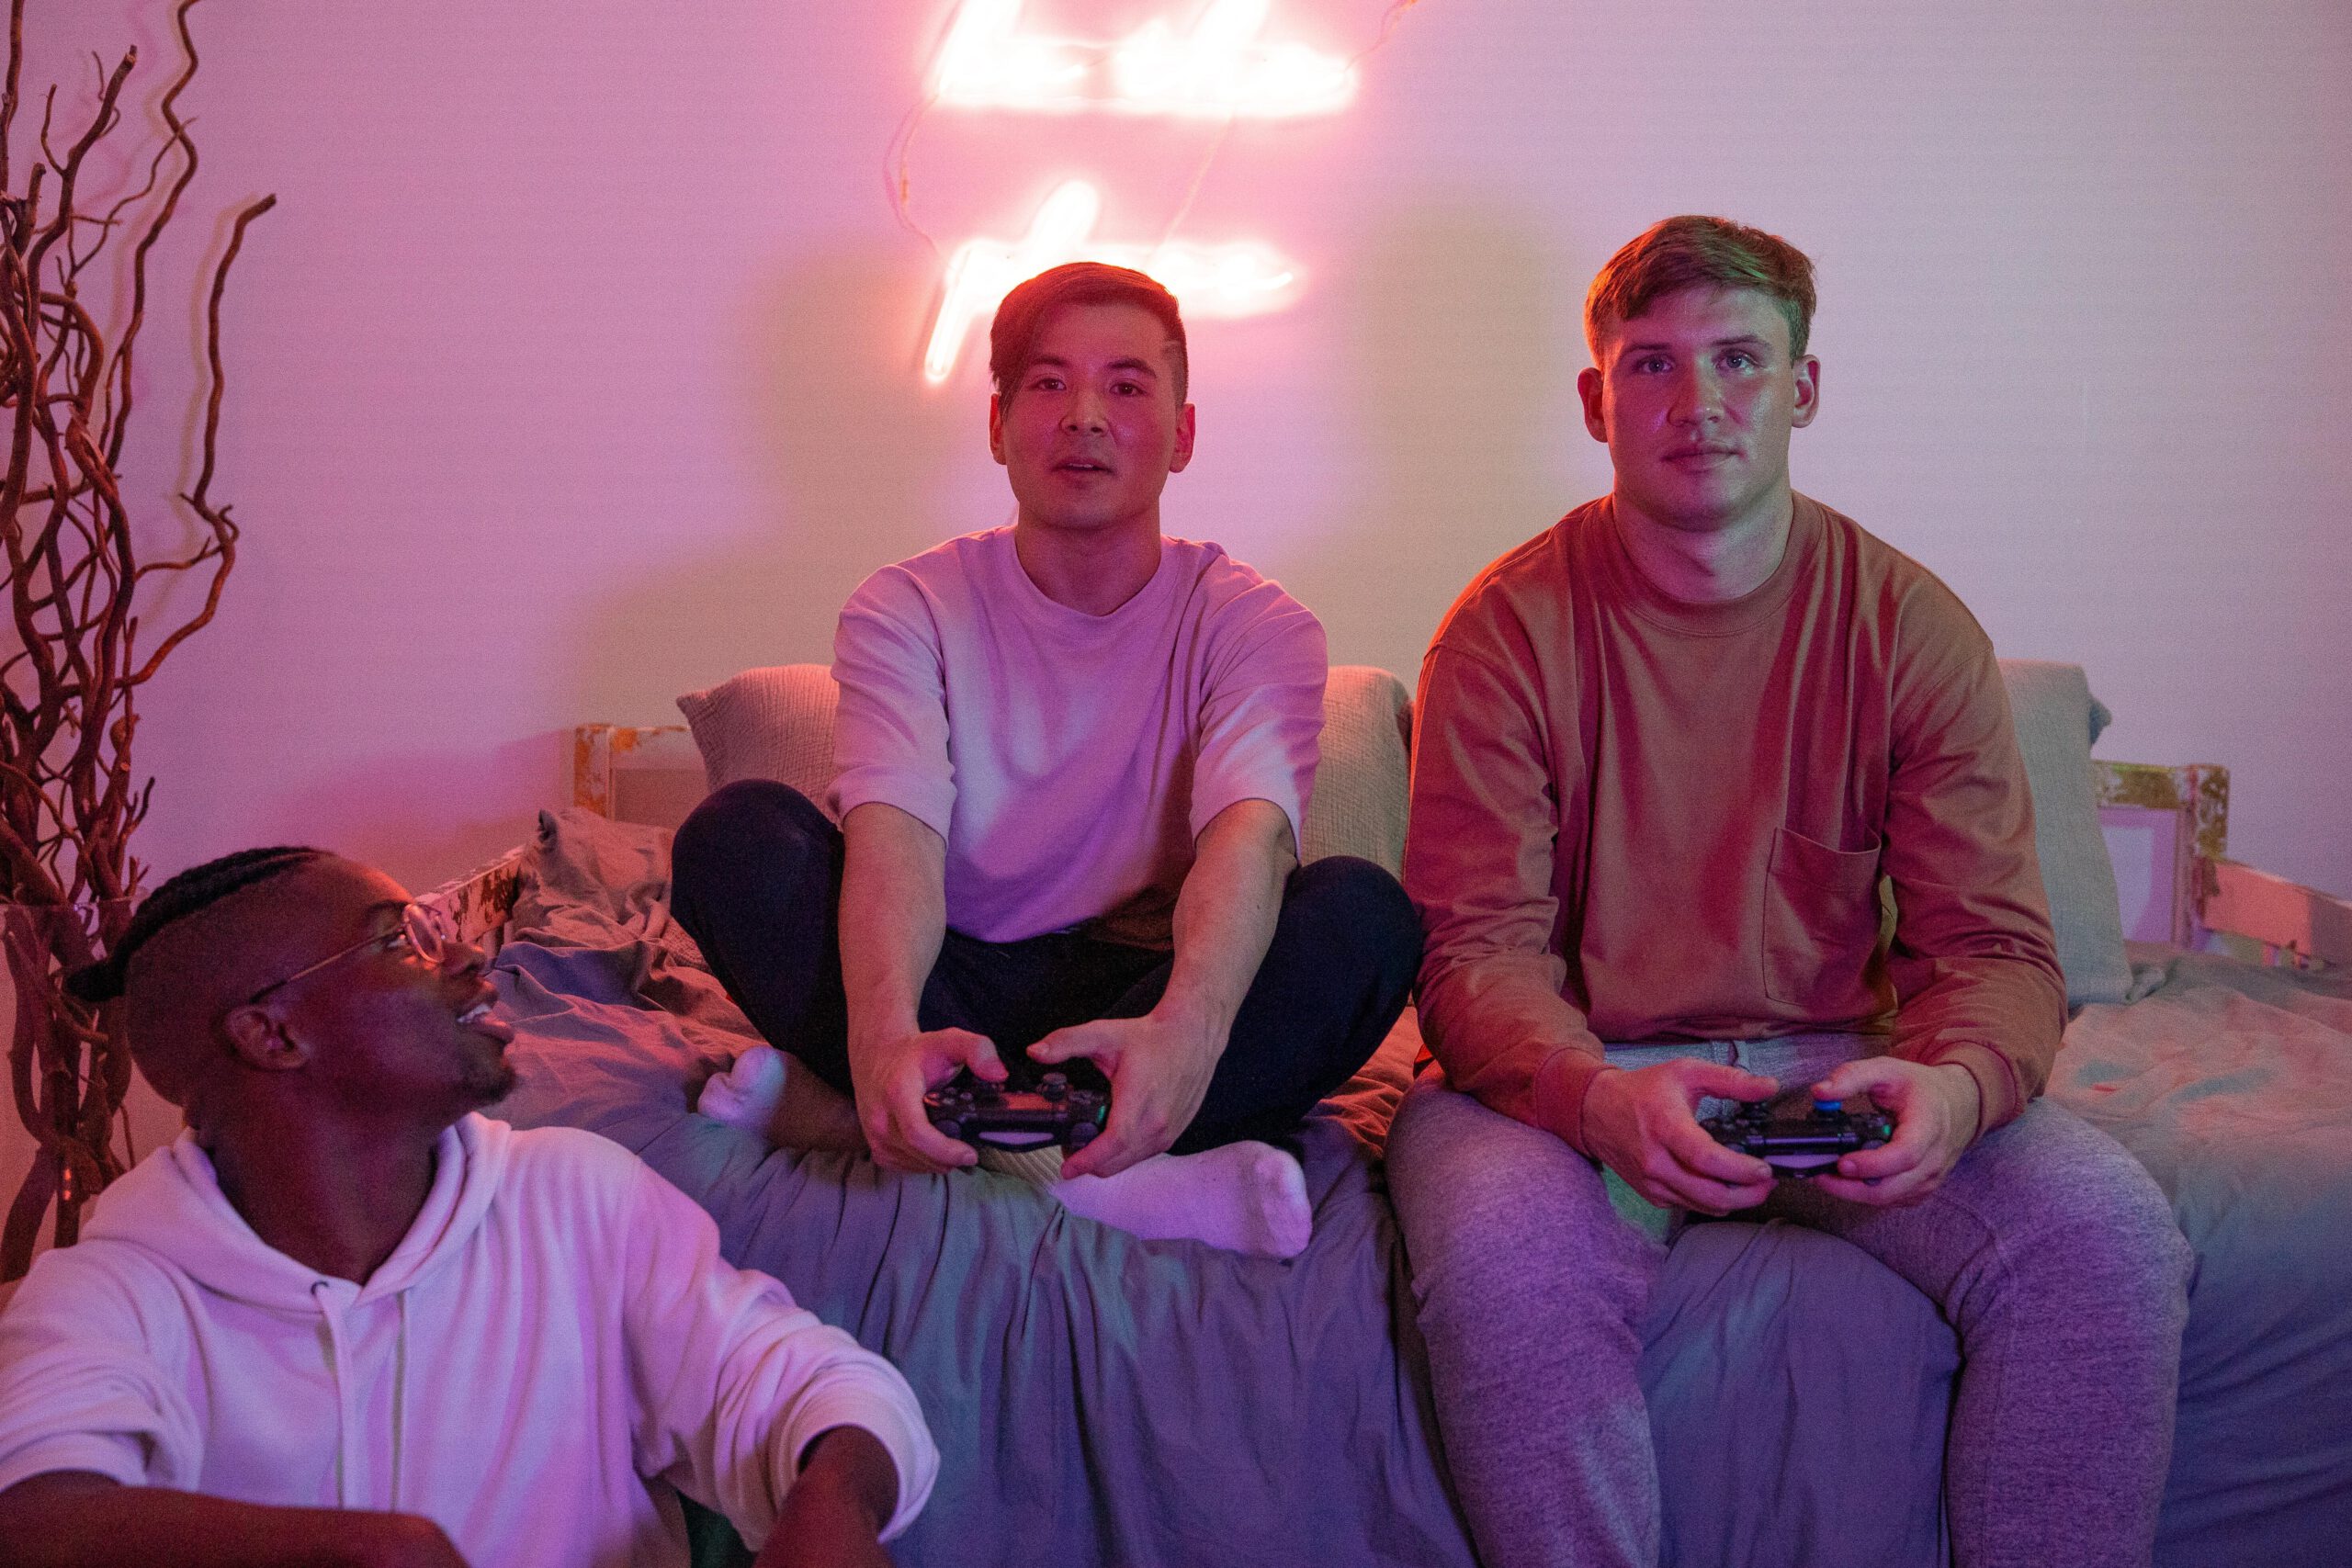 Group playing video games